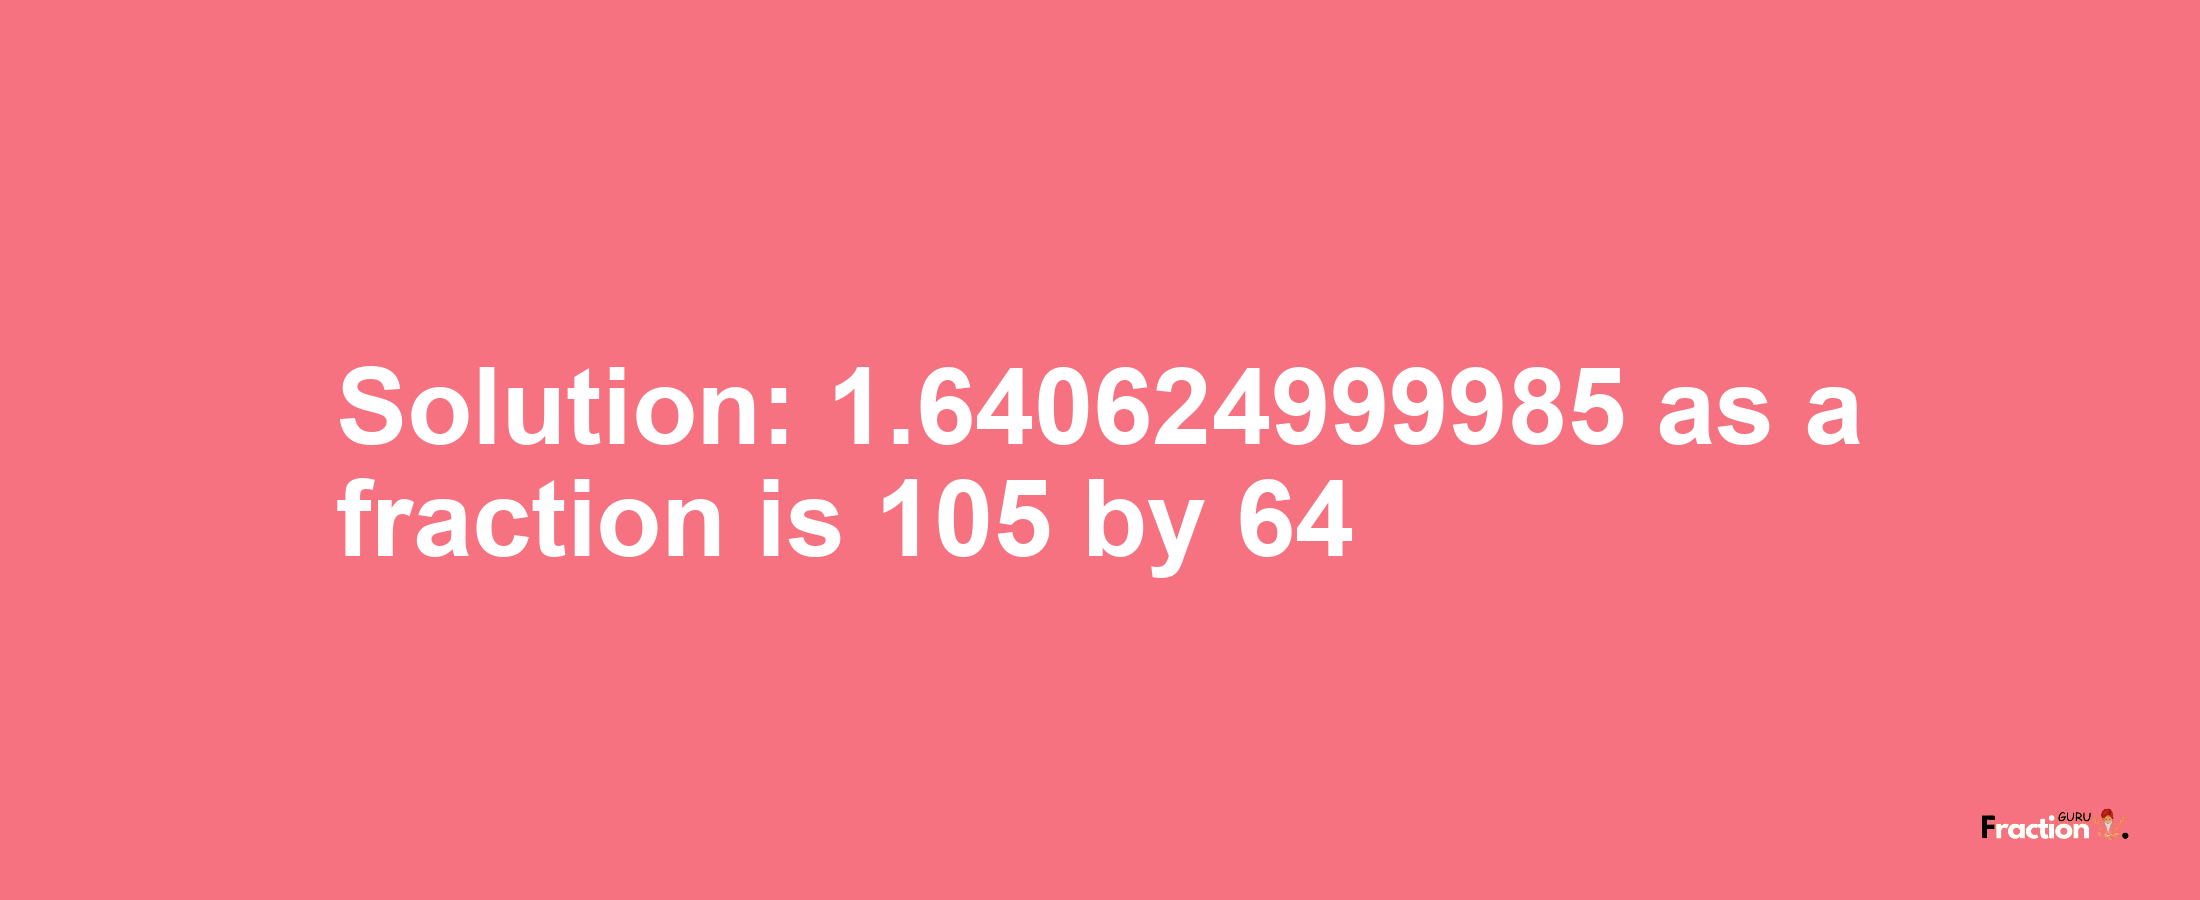 Solution:1.640624999985 as a fraction is 105/64